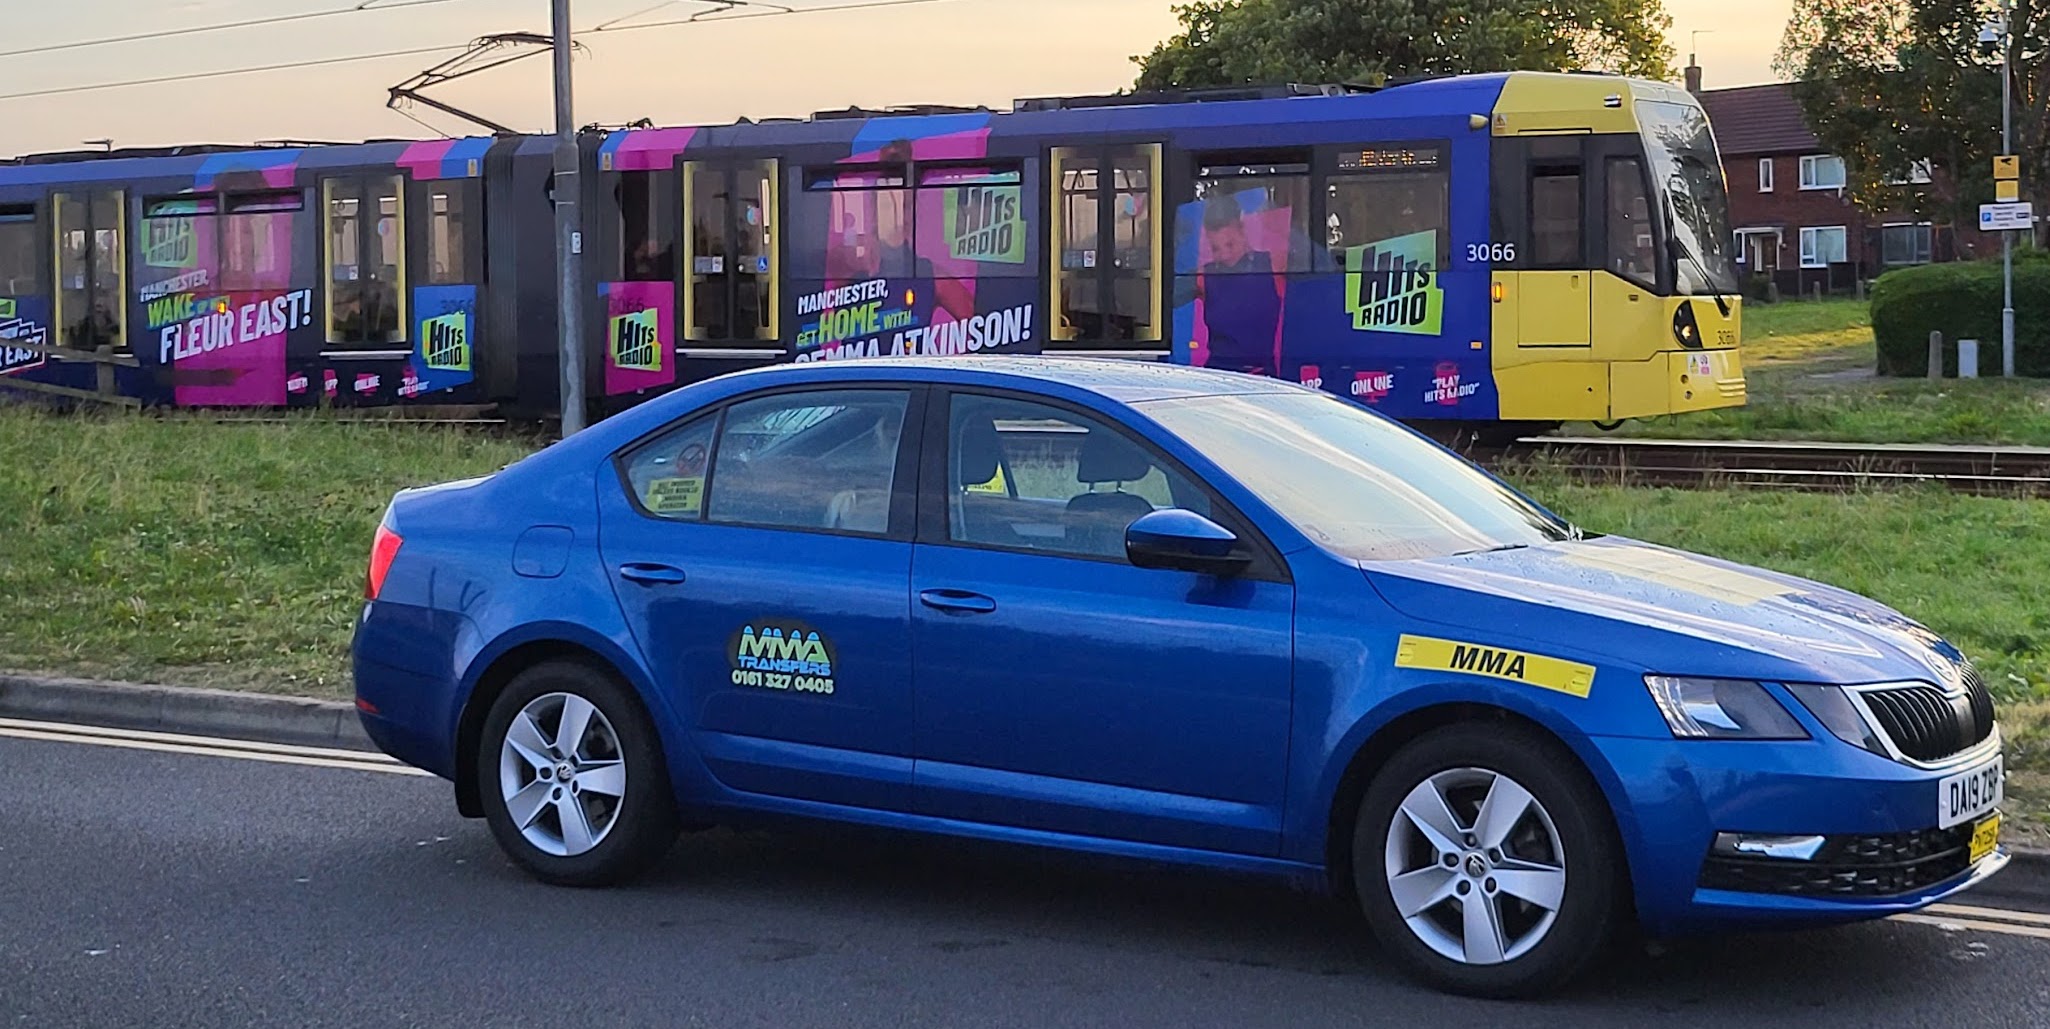 Taxis to Train Stations, Tram Stations, Seaports and Airports from Wirral